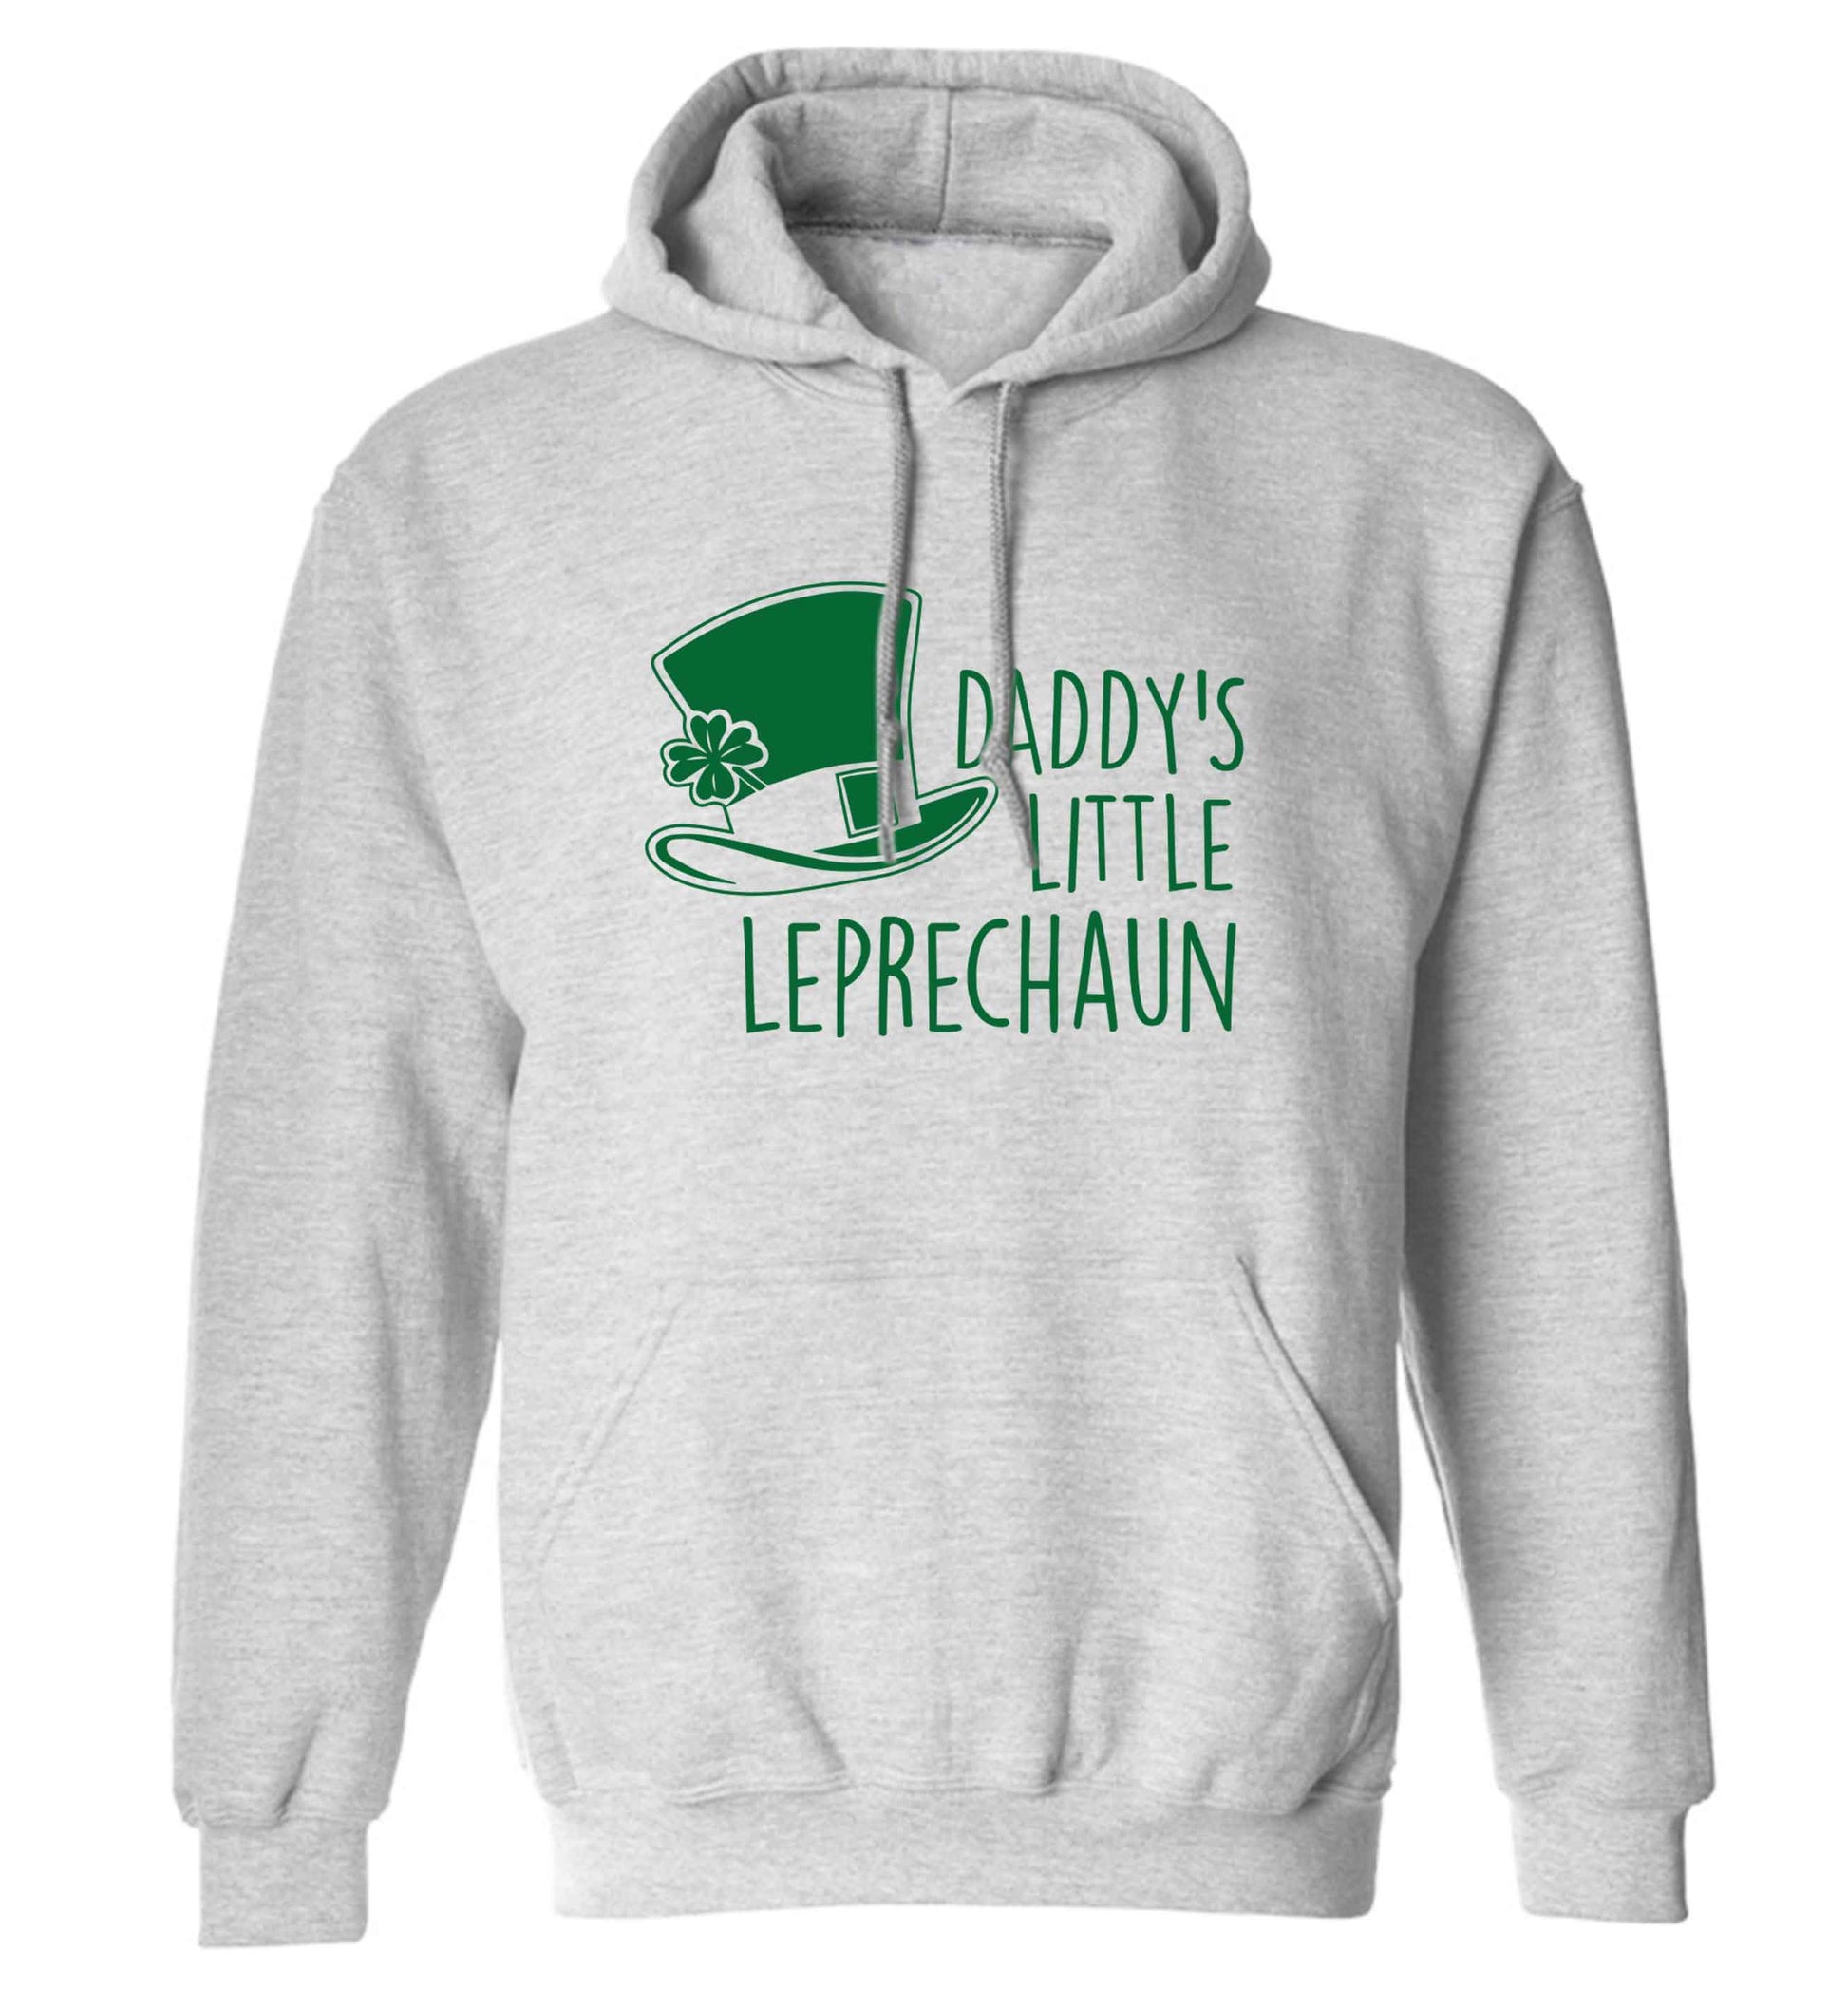 Daddy's lucky charm adults unisex grey hoodie 2XL